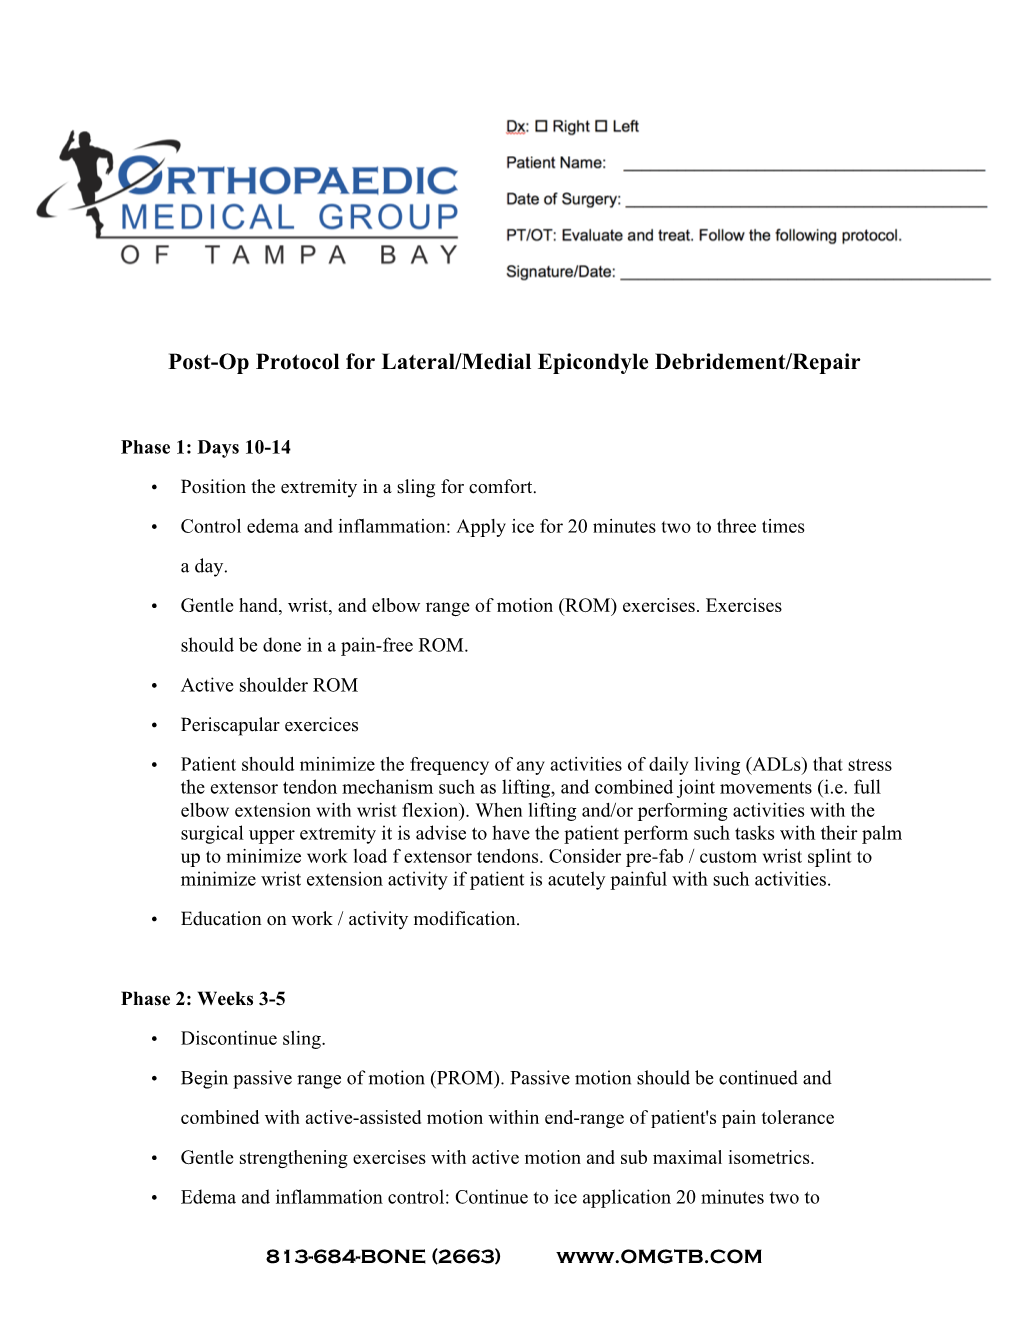 Post-Op Protocol for Lateral/Medial Epicondyle Debridement/Repair